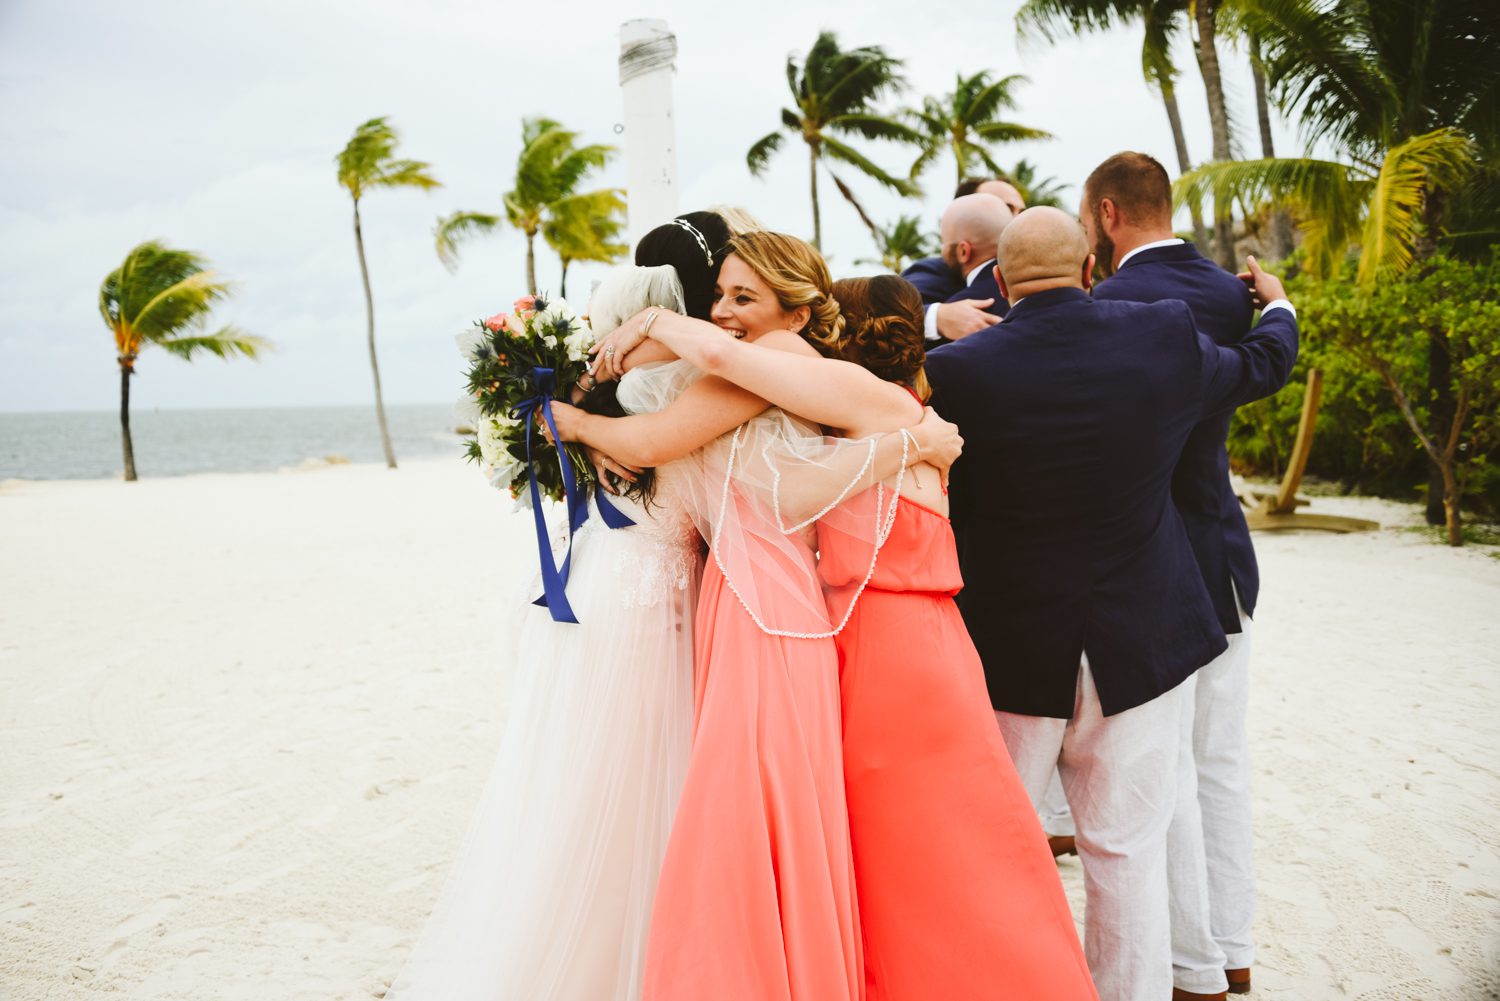 A group of bridesmaids hugging on the beach in the Florida Keys.